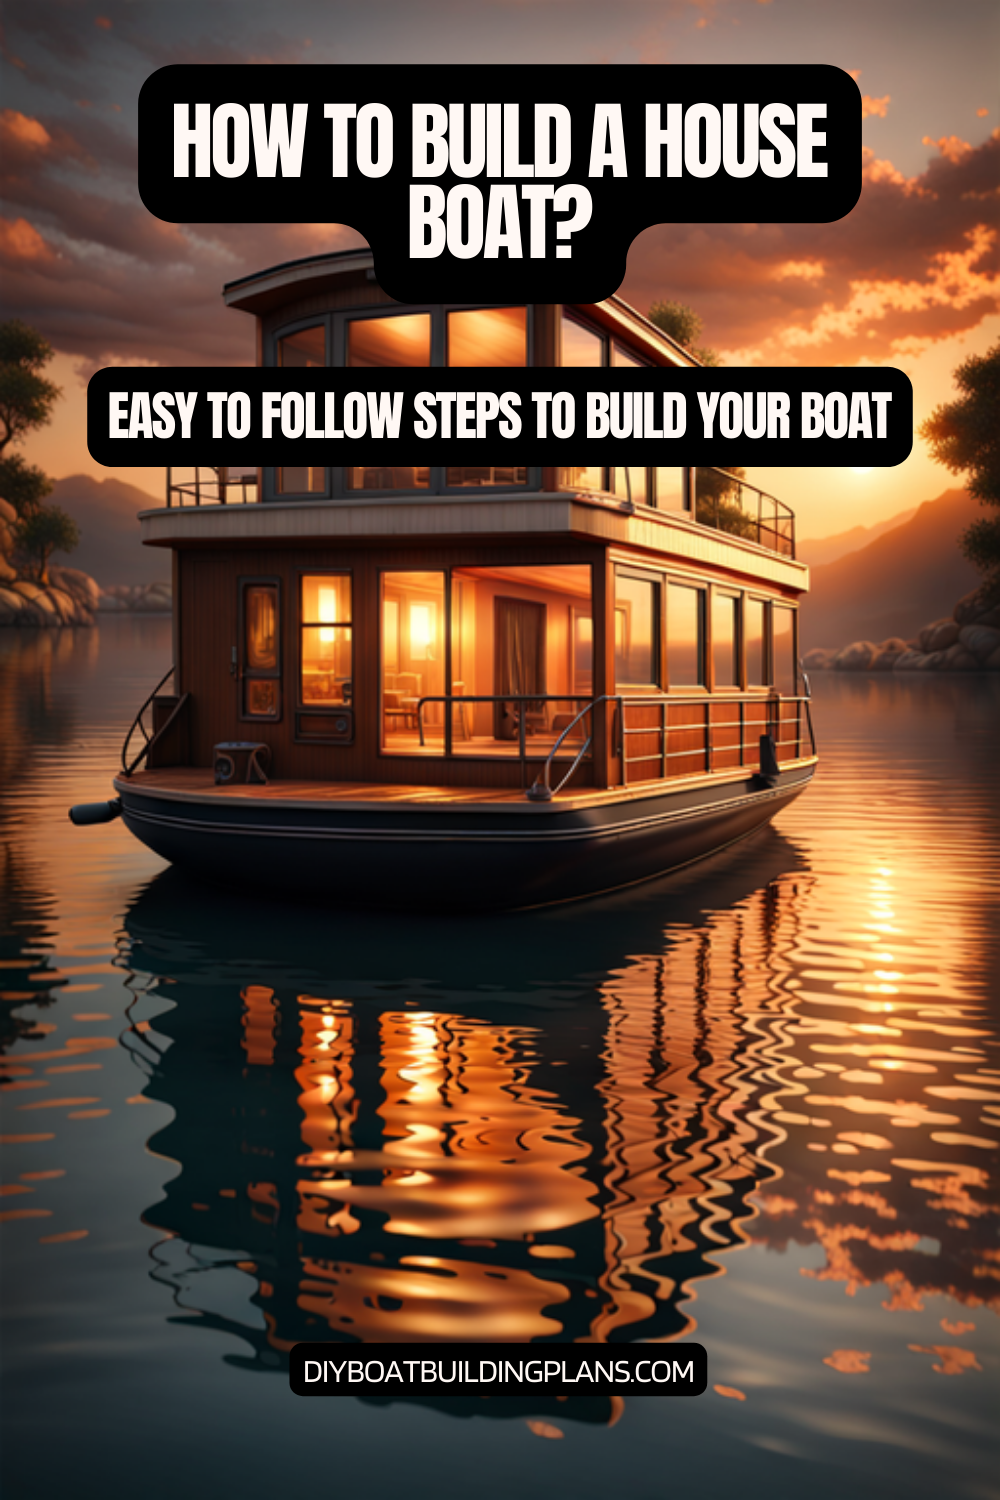 How To Build a House Boat